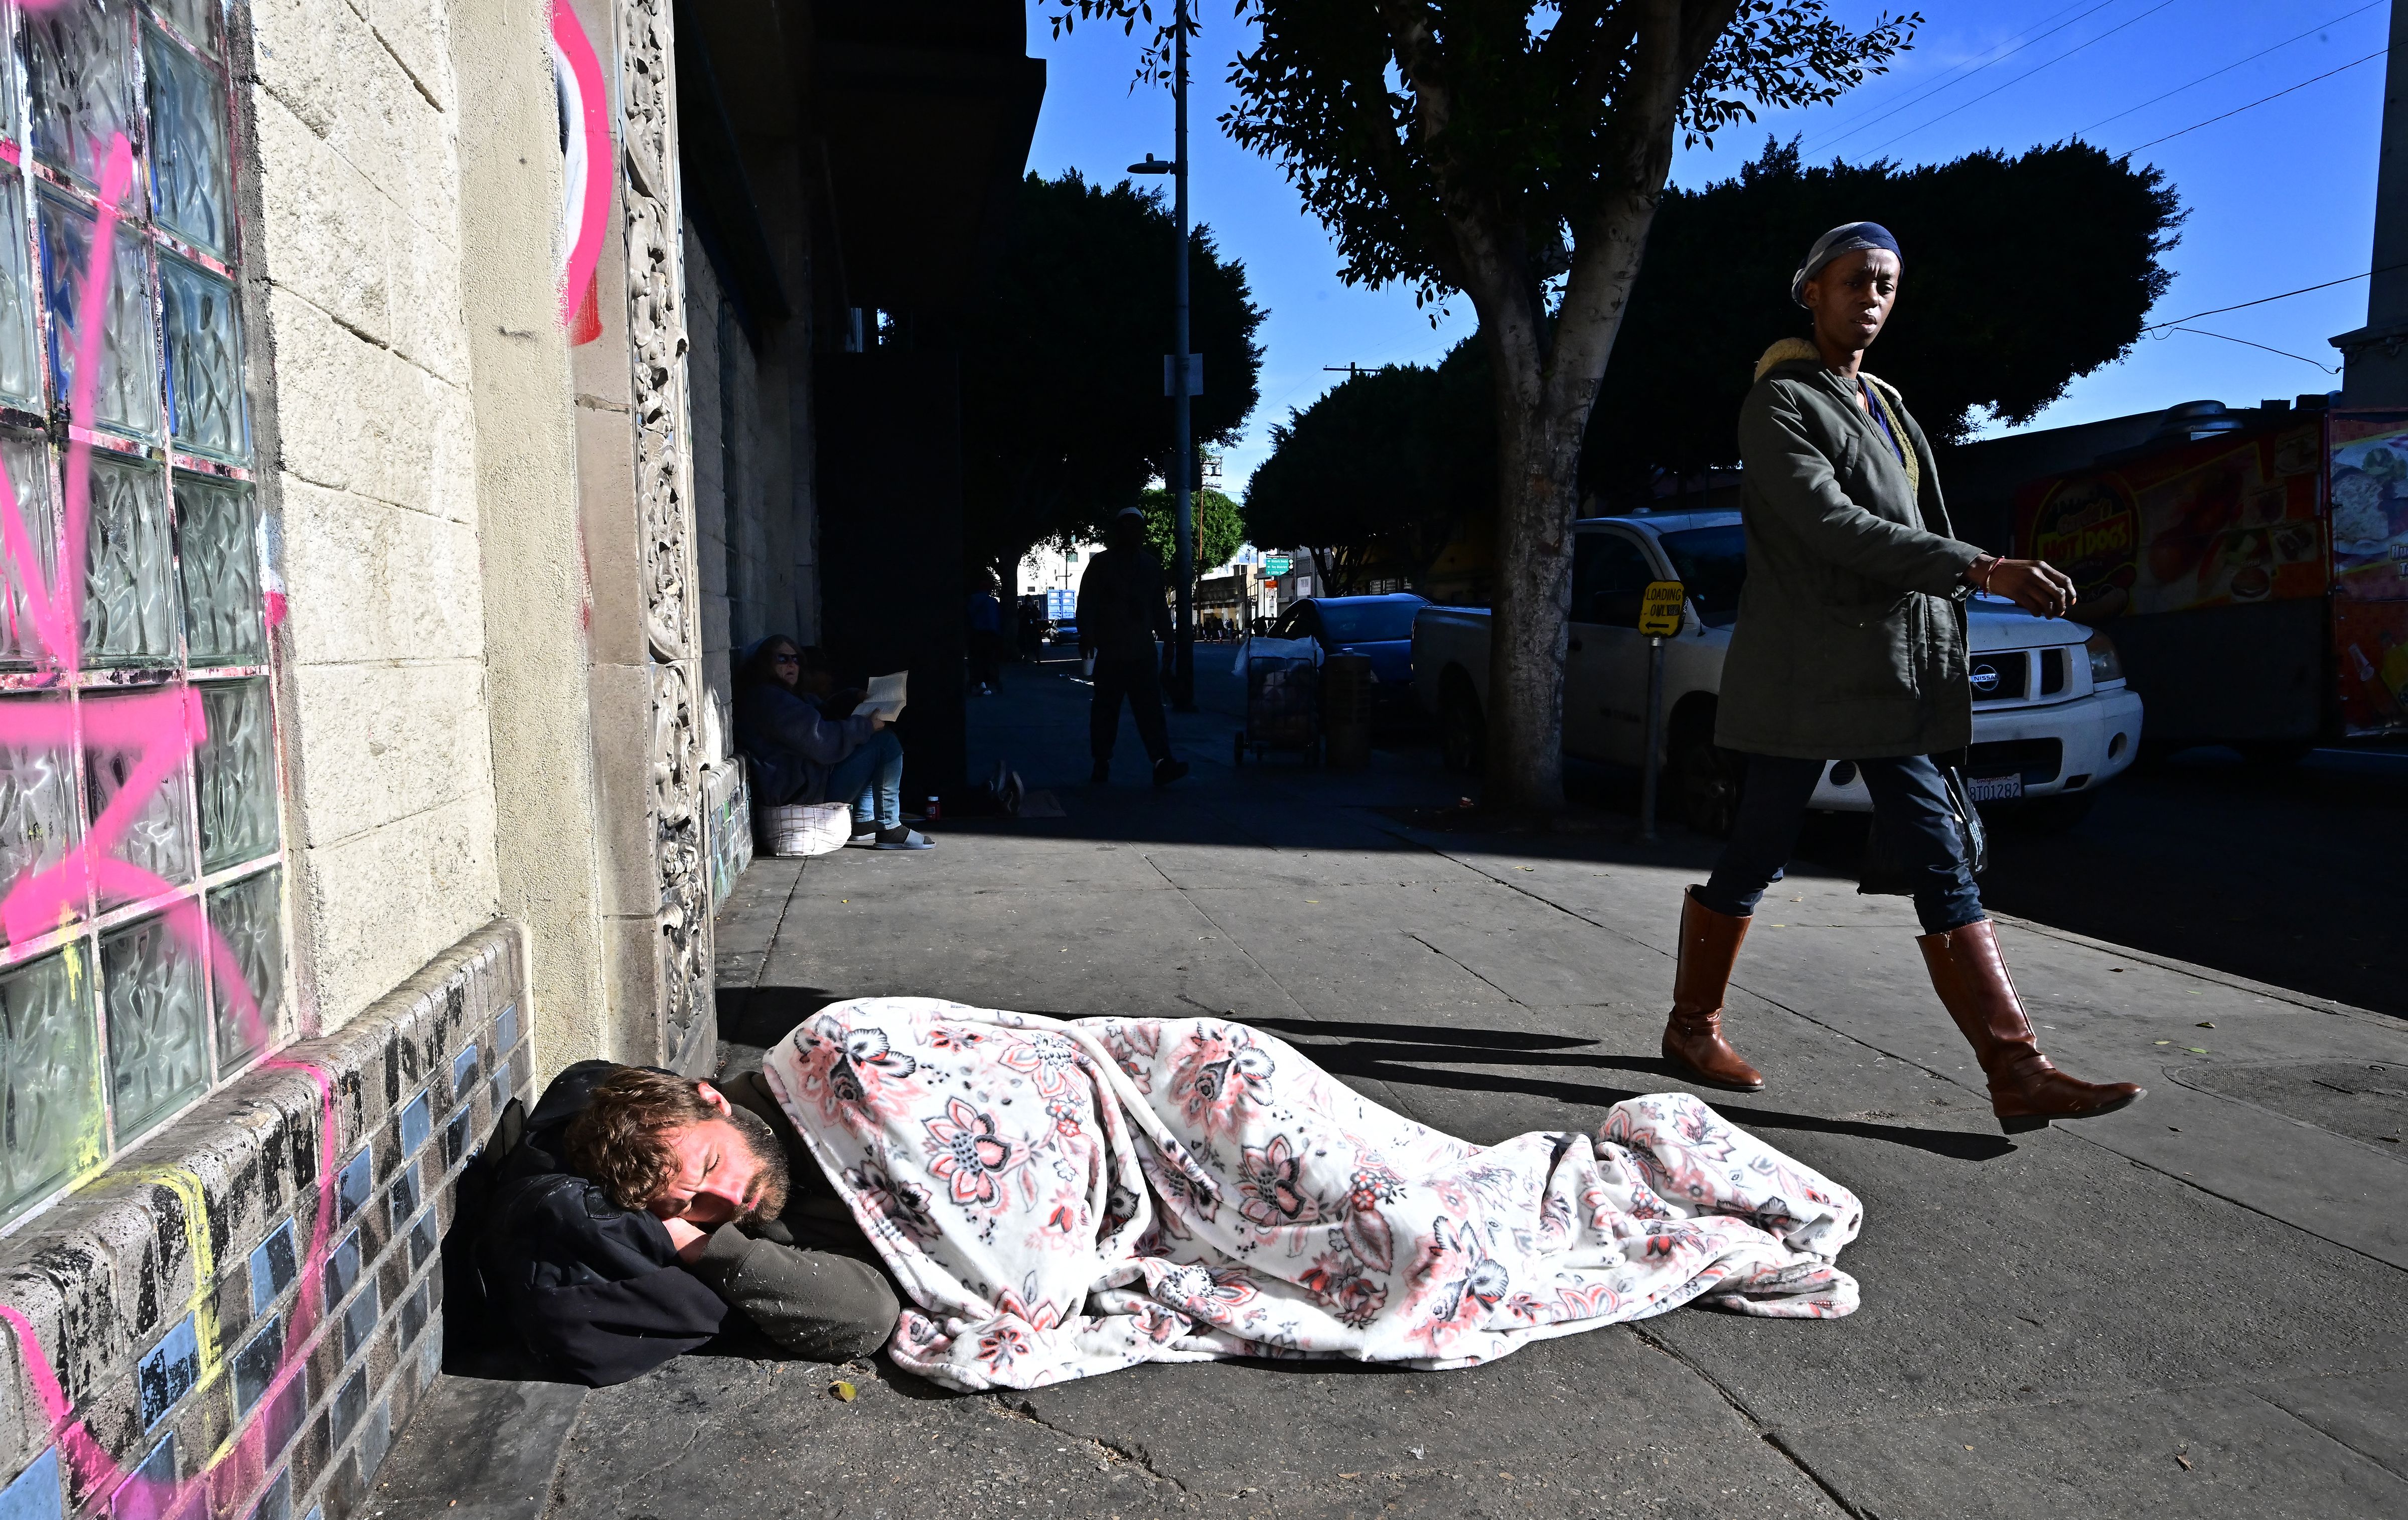 TOPSHOT - A homeless man sleeps on the sidewalk in Downtown Los Angeles on November 22, 2023. (Photo by Frederic J. BROWN / AFP) (Photo by FREDERIC J. BROWN/AFP via Getty Images)